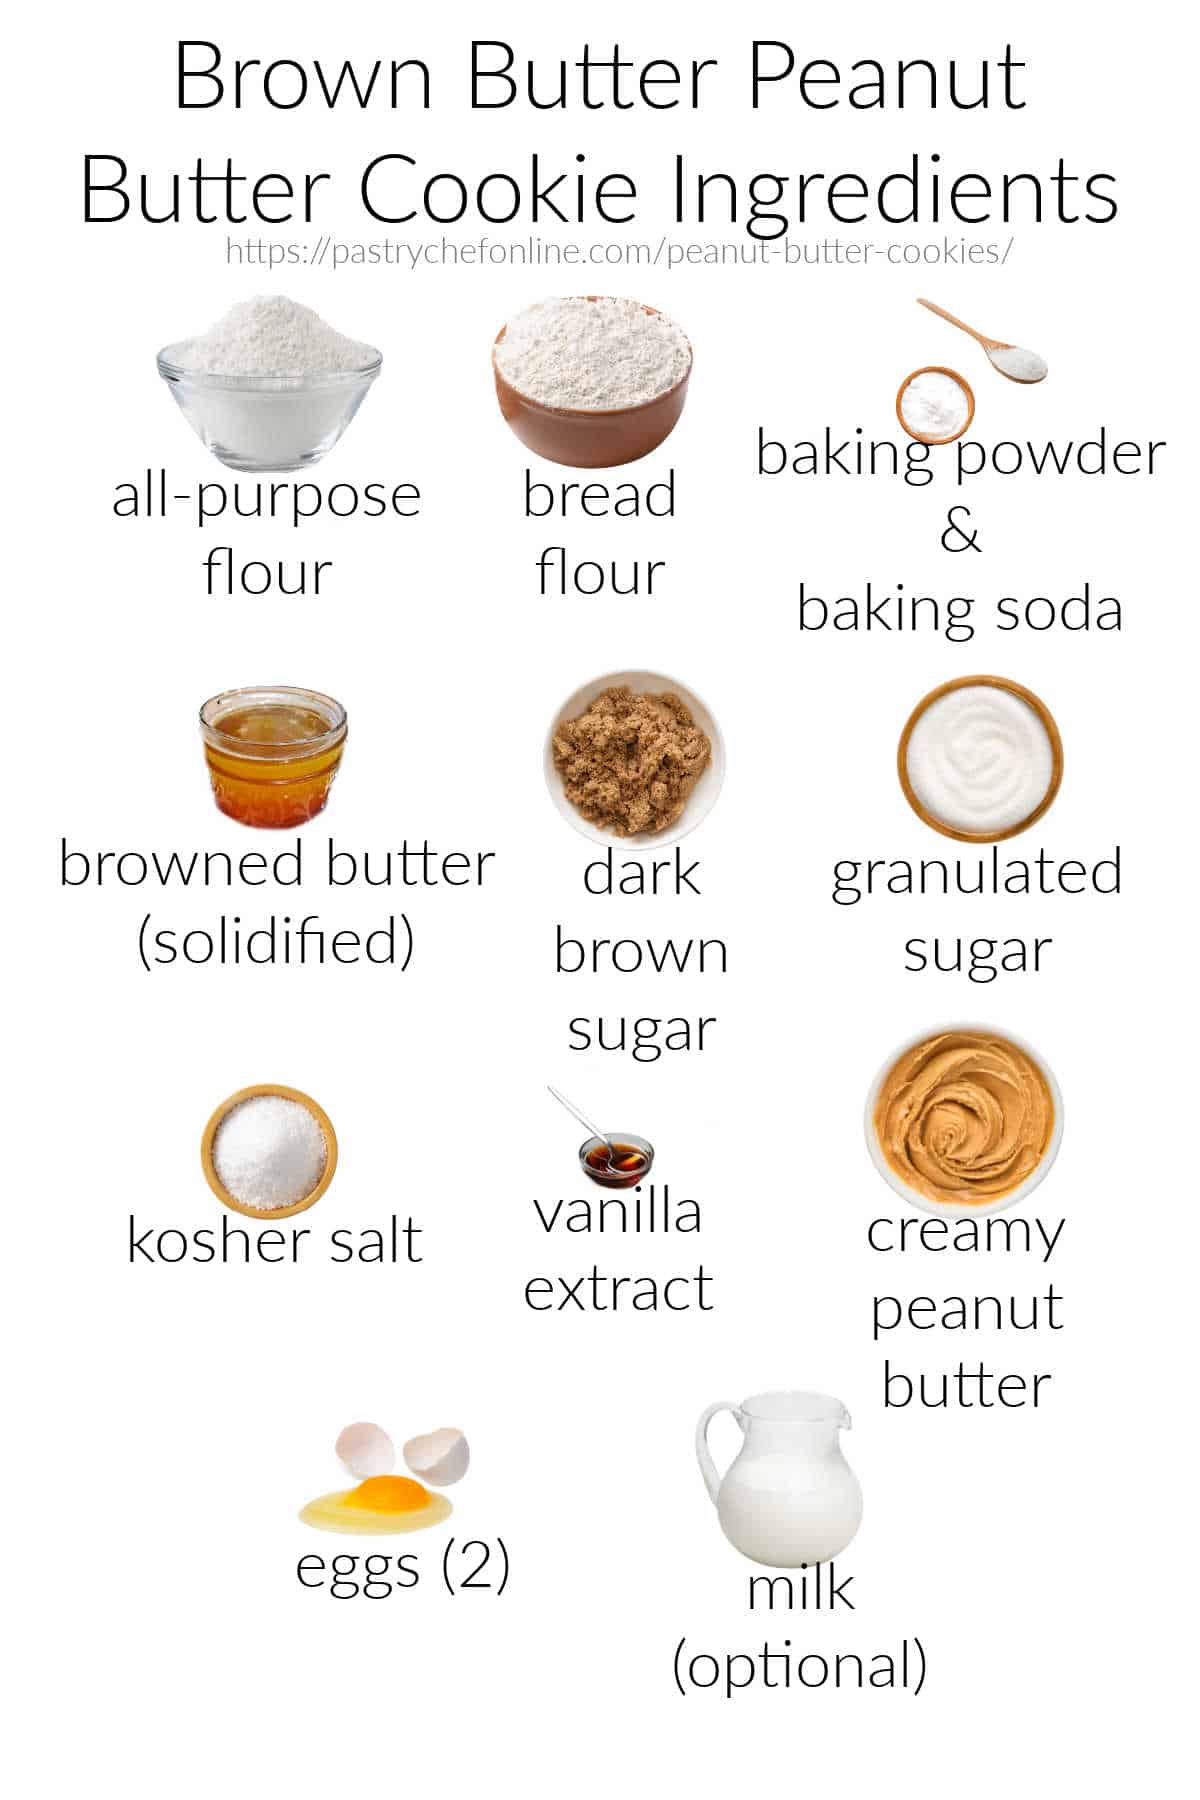 Full-color images of all the ingredients needed to make peanut butter cookies, labeled and arranged on a white background. Title text reads, "Brown Butter Peanut Butter Cookie Ingredients," and the pictured ingredients are all-purpose flour, bread flour, baking powder and baking soda, brown btter, dark brown sugar, granulated sugar, salt, vanilla, peanut butter, eggs, and milk.